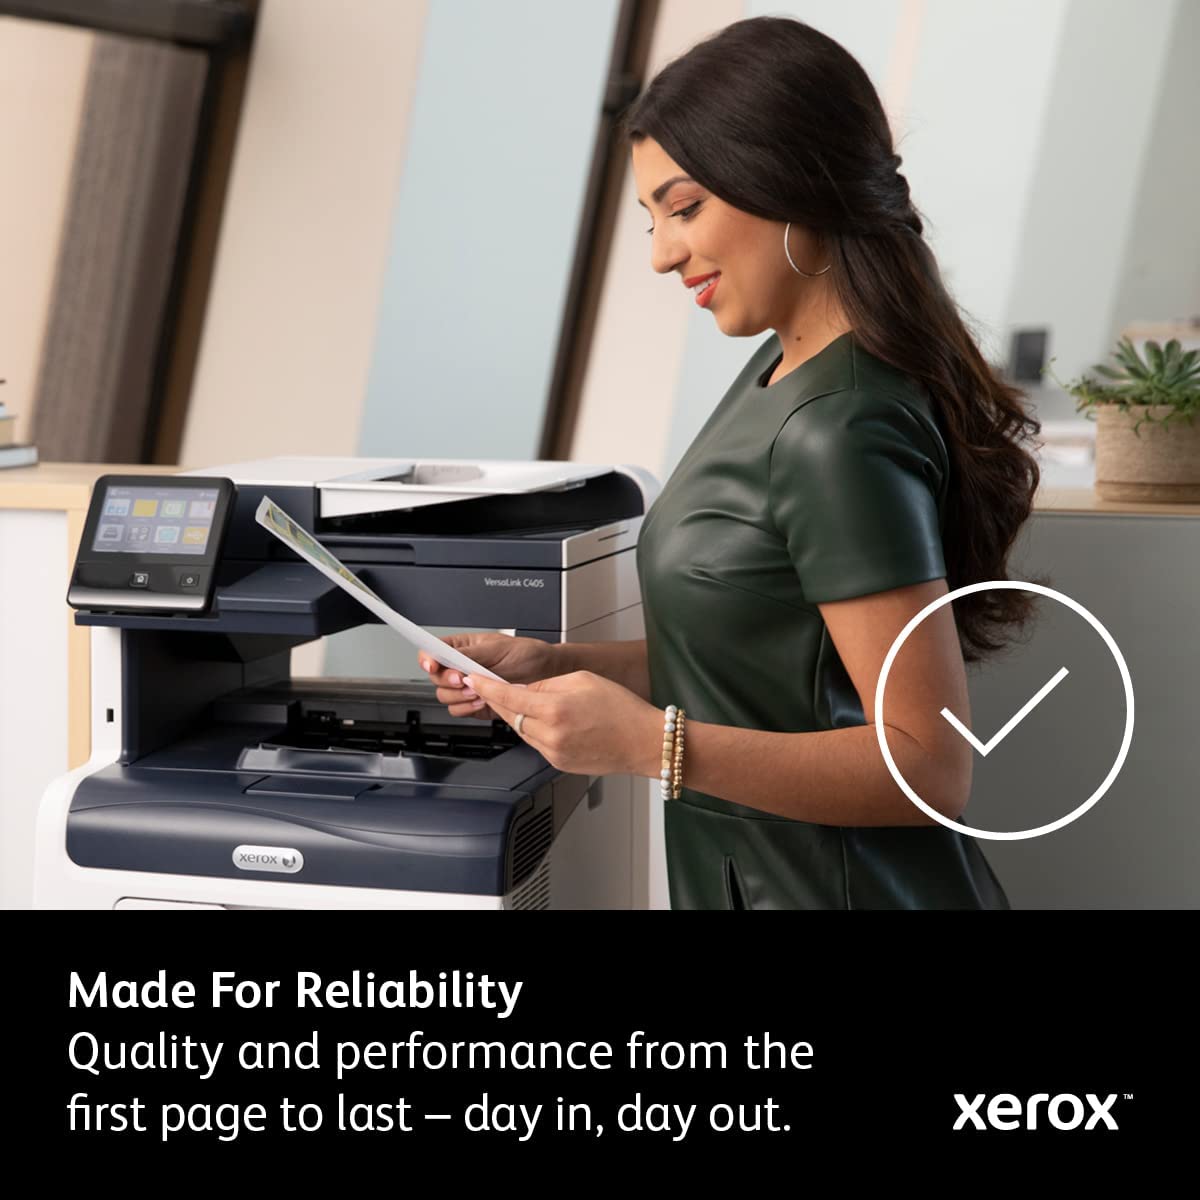 Xerox Phaser 3260/ Workcentre 3225 Black High Capacity Toner-Cartridge (3,000 Pages) - 106R02777